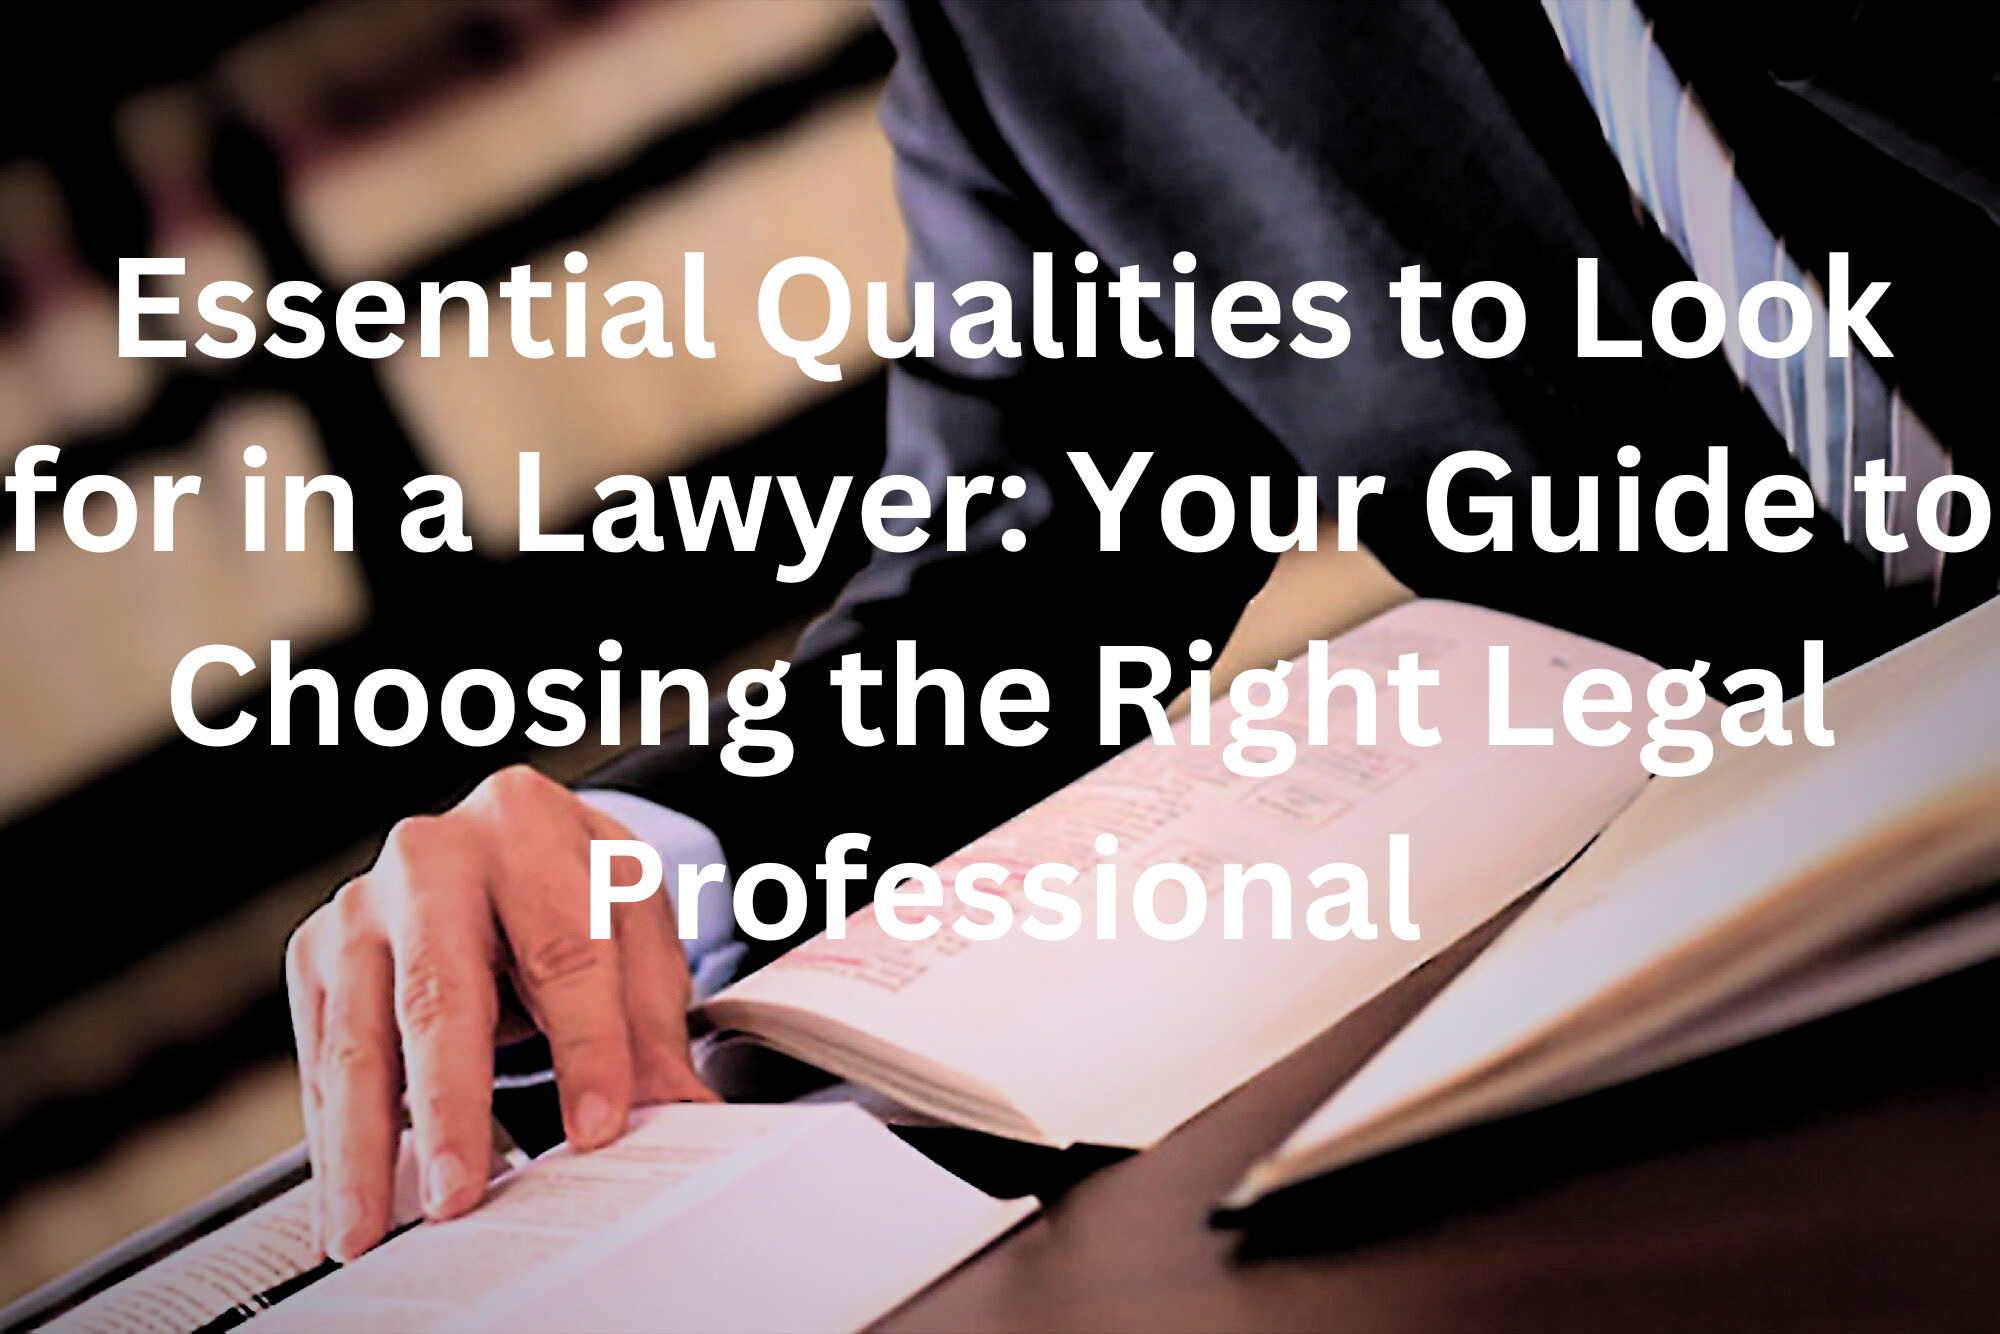 Essential Qualities to Look for in a Lawyer: Your Guide to Choosing the Right Legal Professional